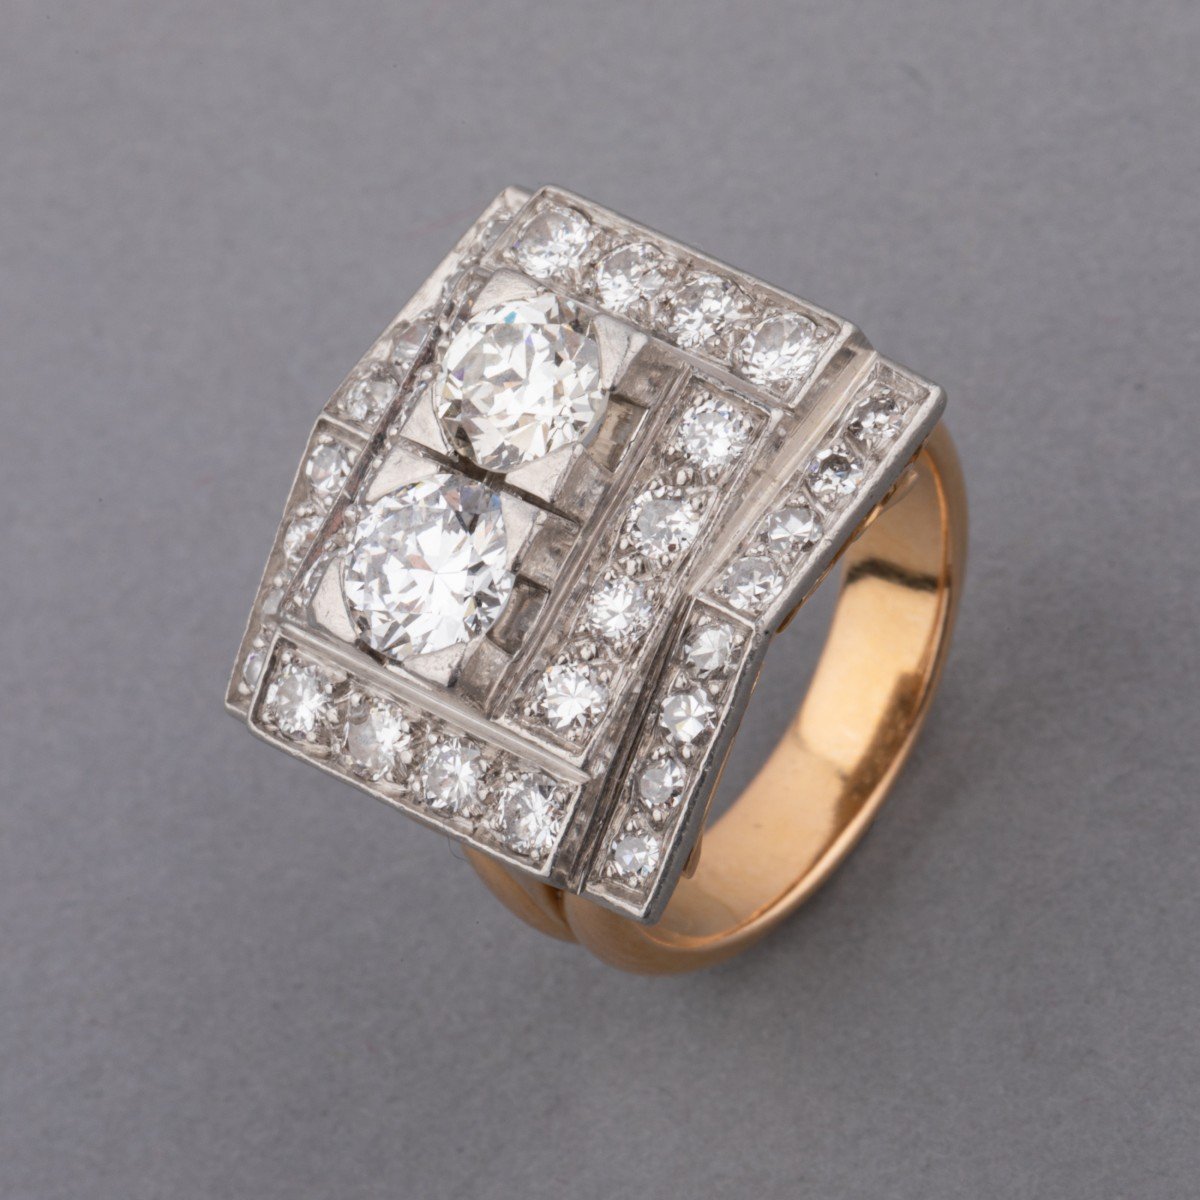 Old Ring In Platinum Gold And 3 Carats Of Diamonds-photo-2